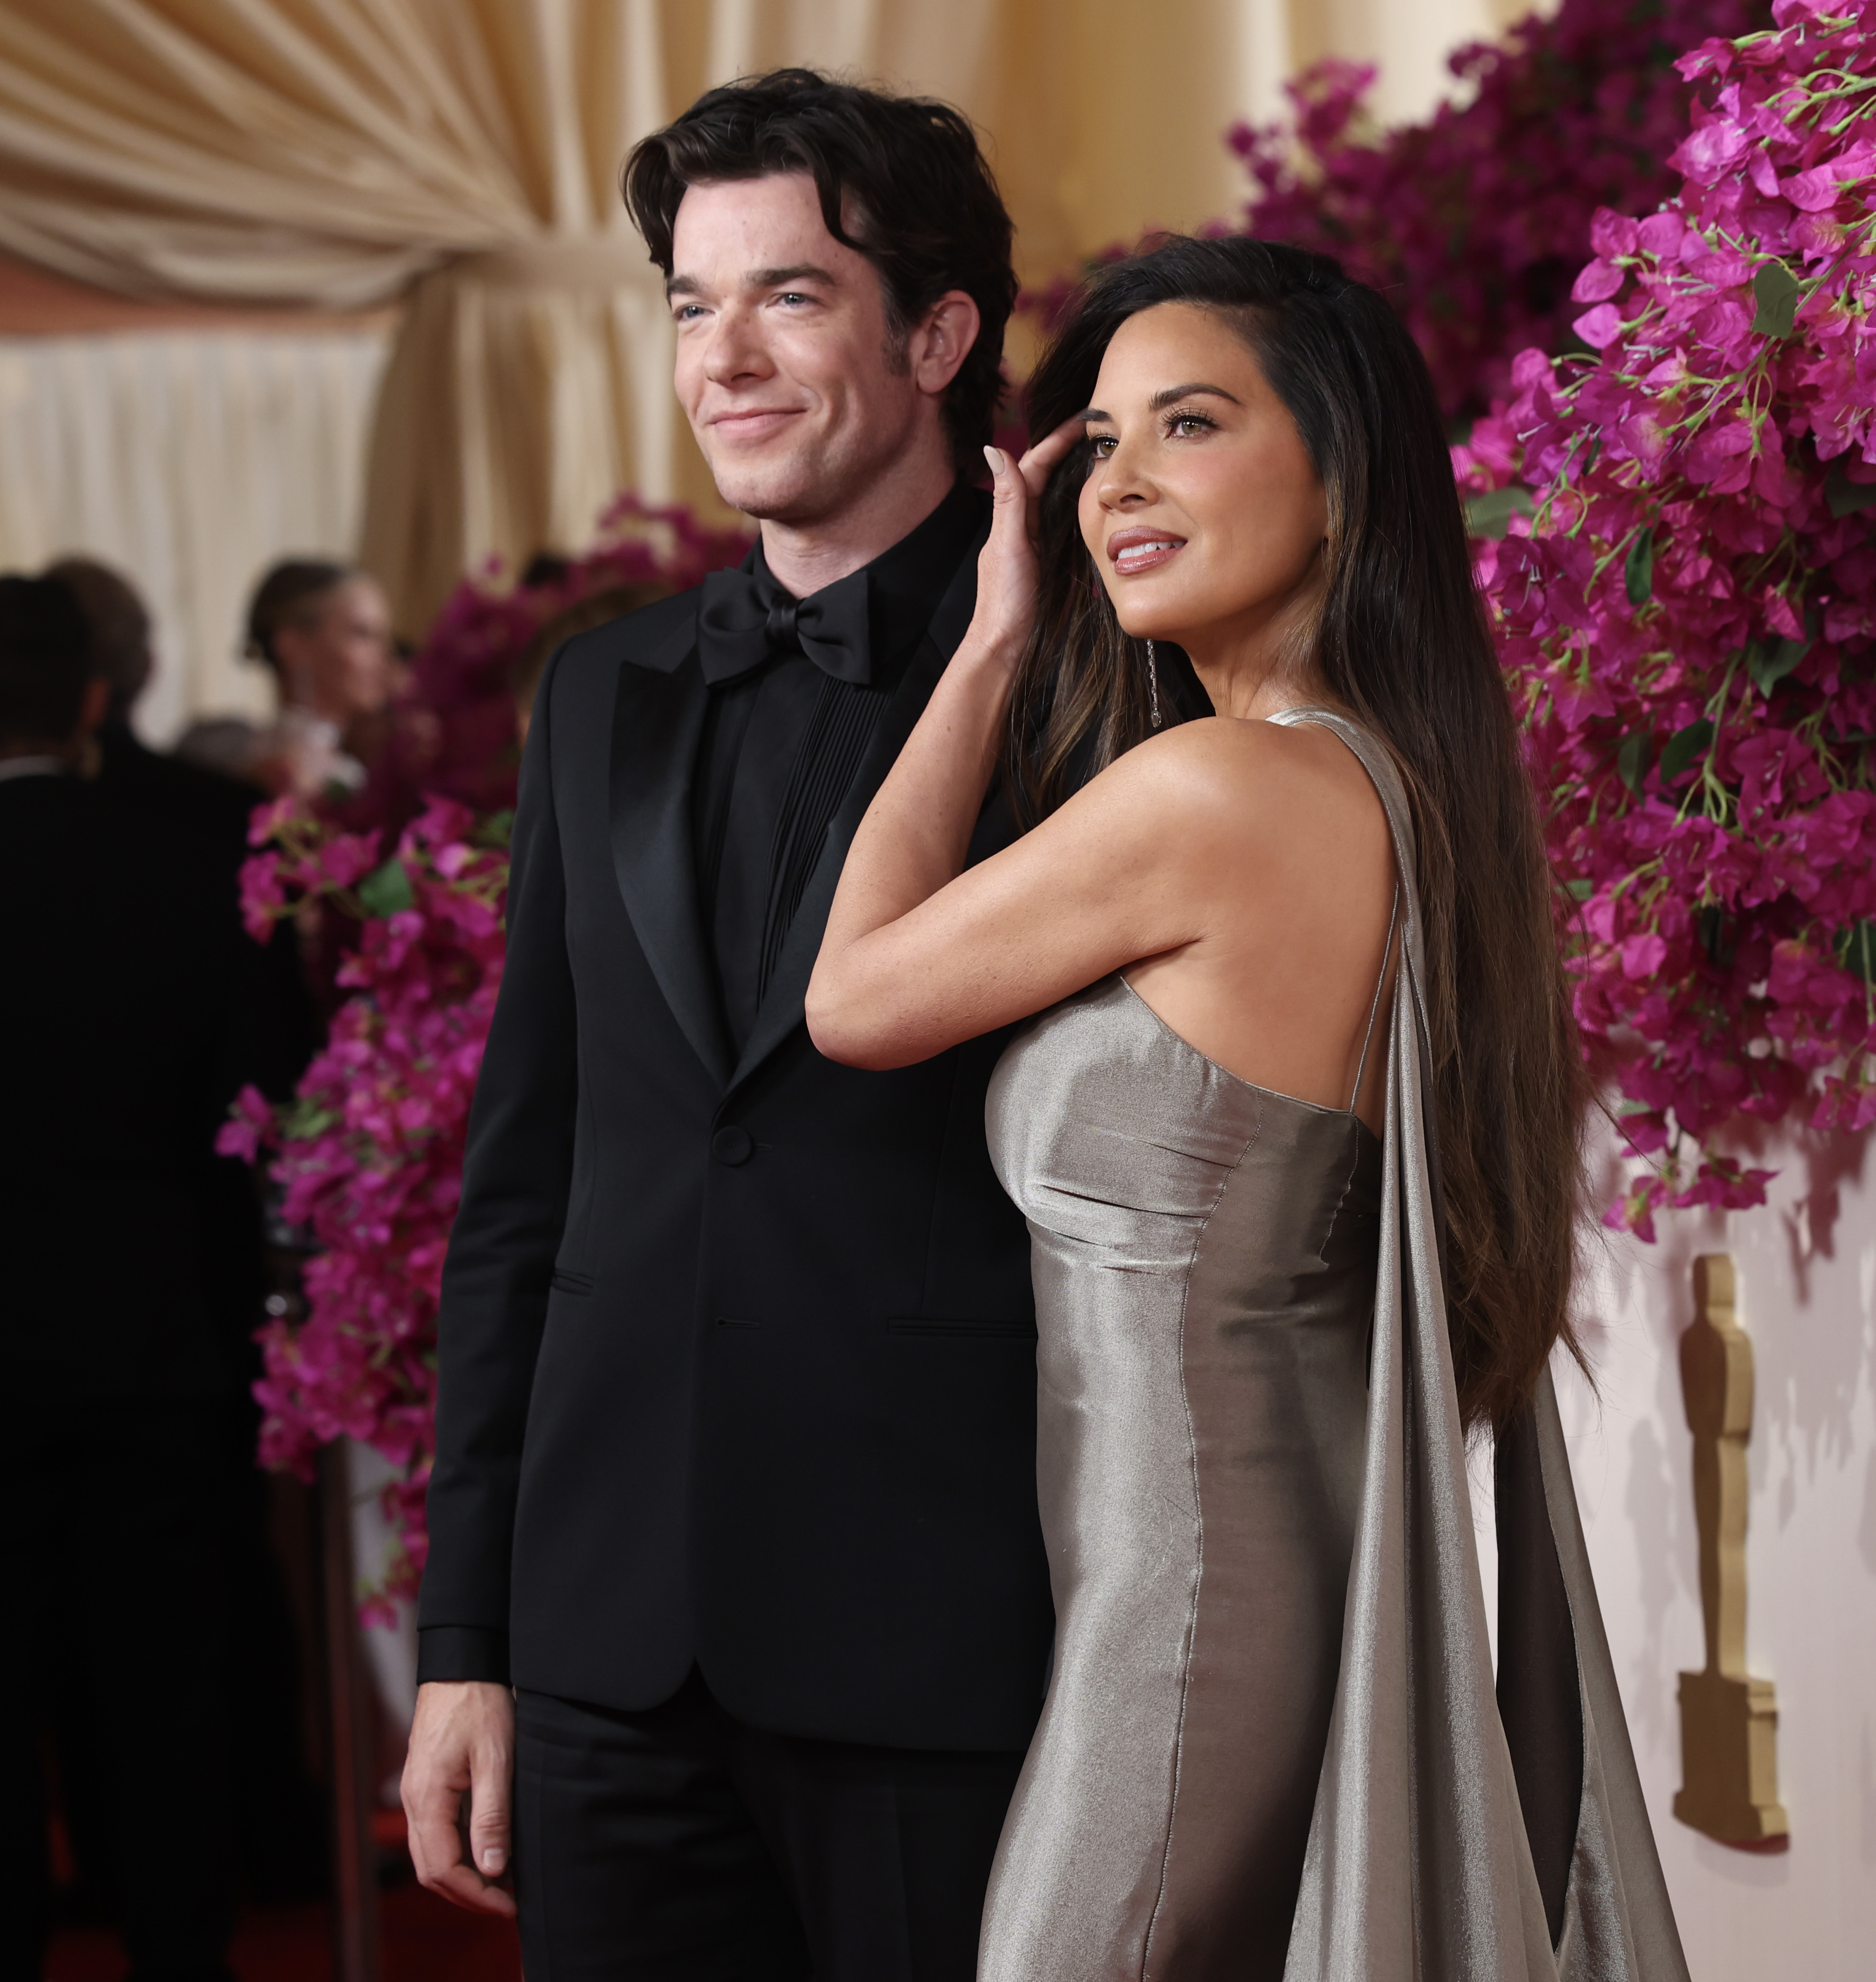 John Mulaney and Olivia Munn pose together on a red carpet event. John wears a classic black tuxedo, and Olivia wears a silver gown with a draped back